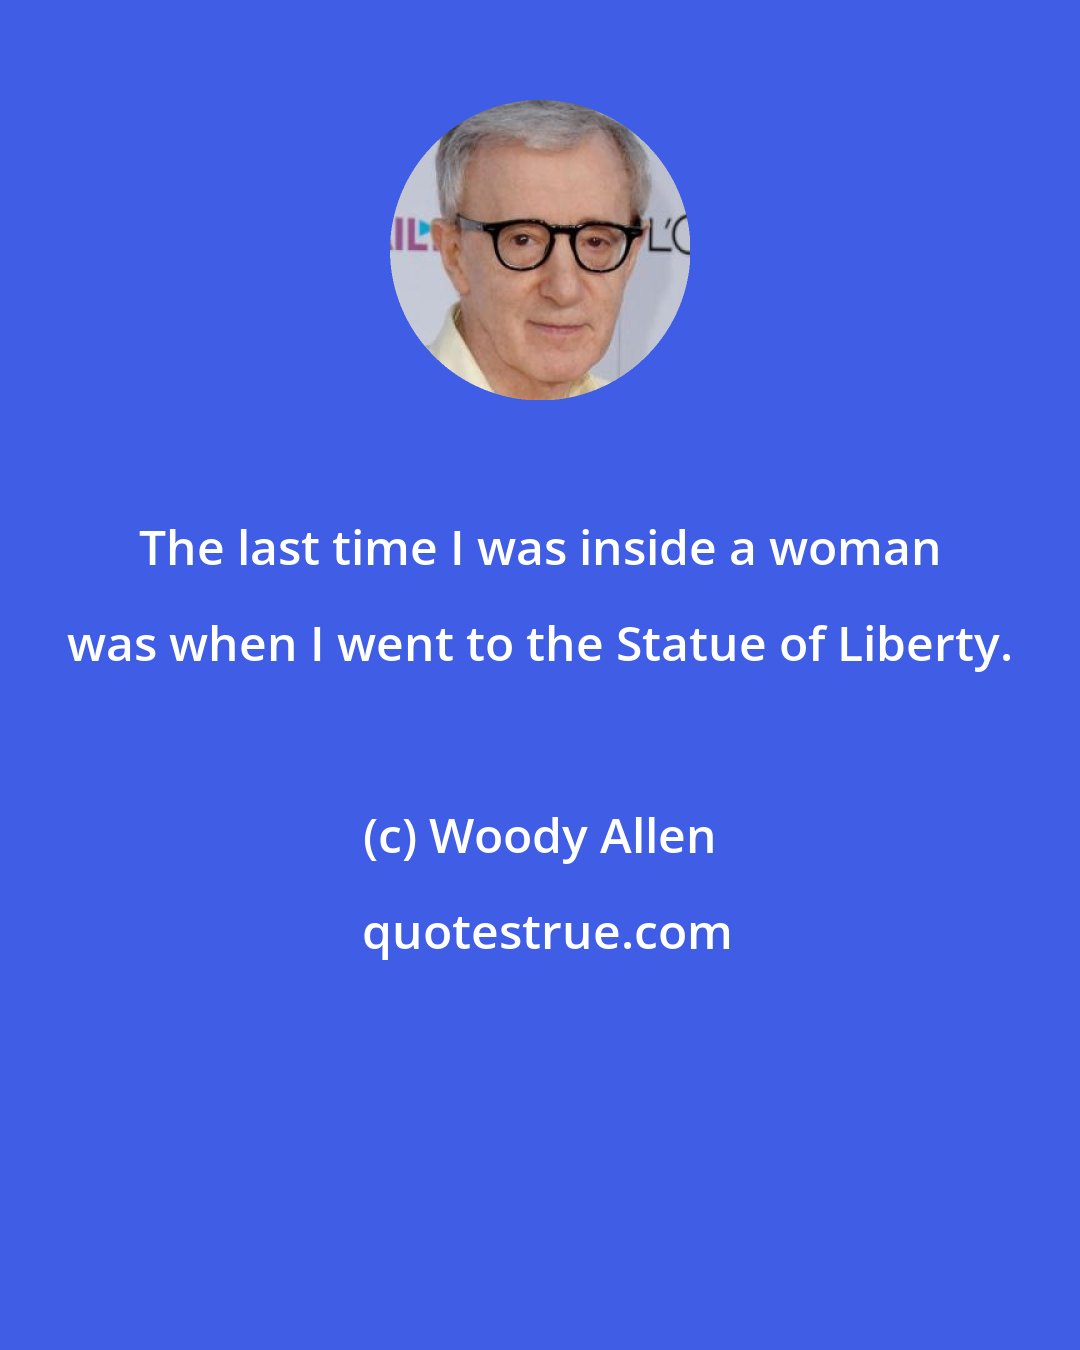 Woody Allen: The last time I was inside a woman was when I went to the Statue of Liberty.